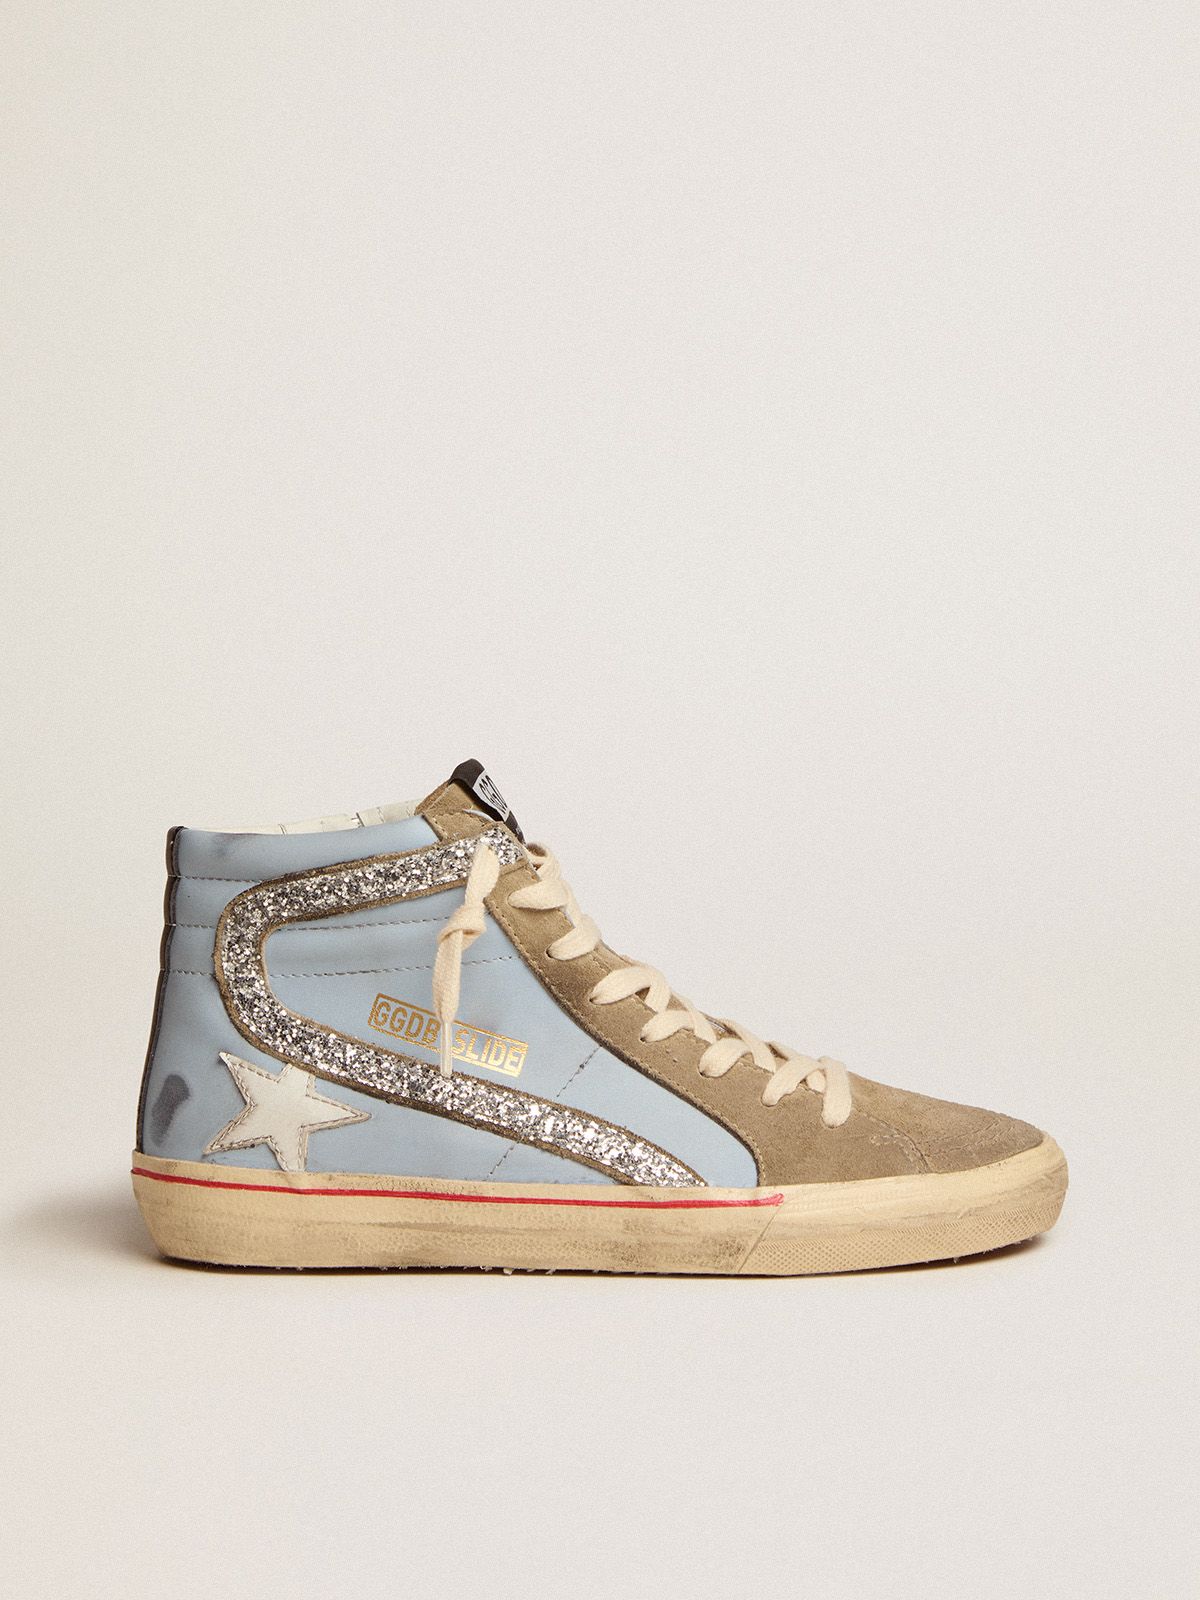 Golden Goose Bambina Slide sneakers in powder-blue leather with dove-gray suede tongue and silver glitter flash